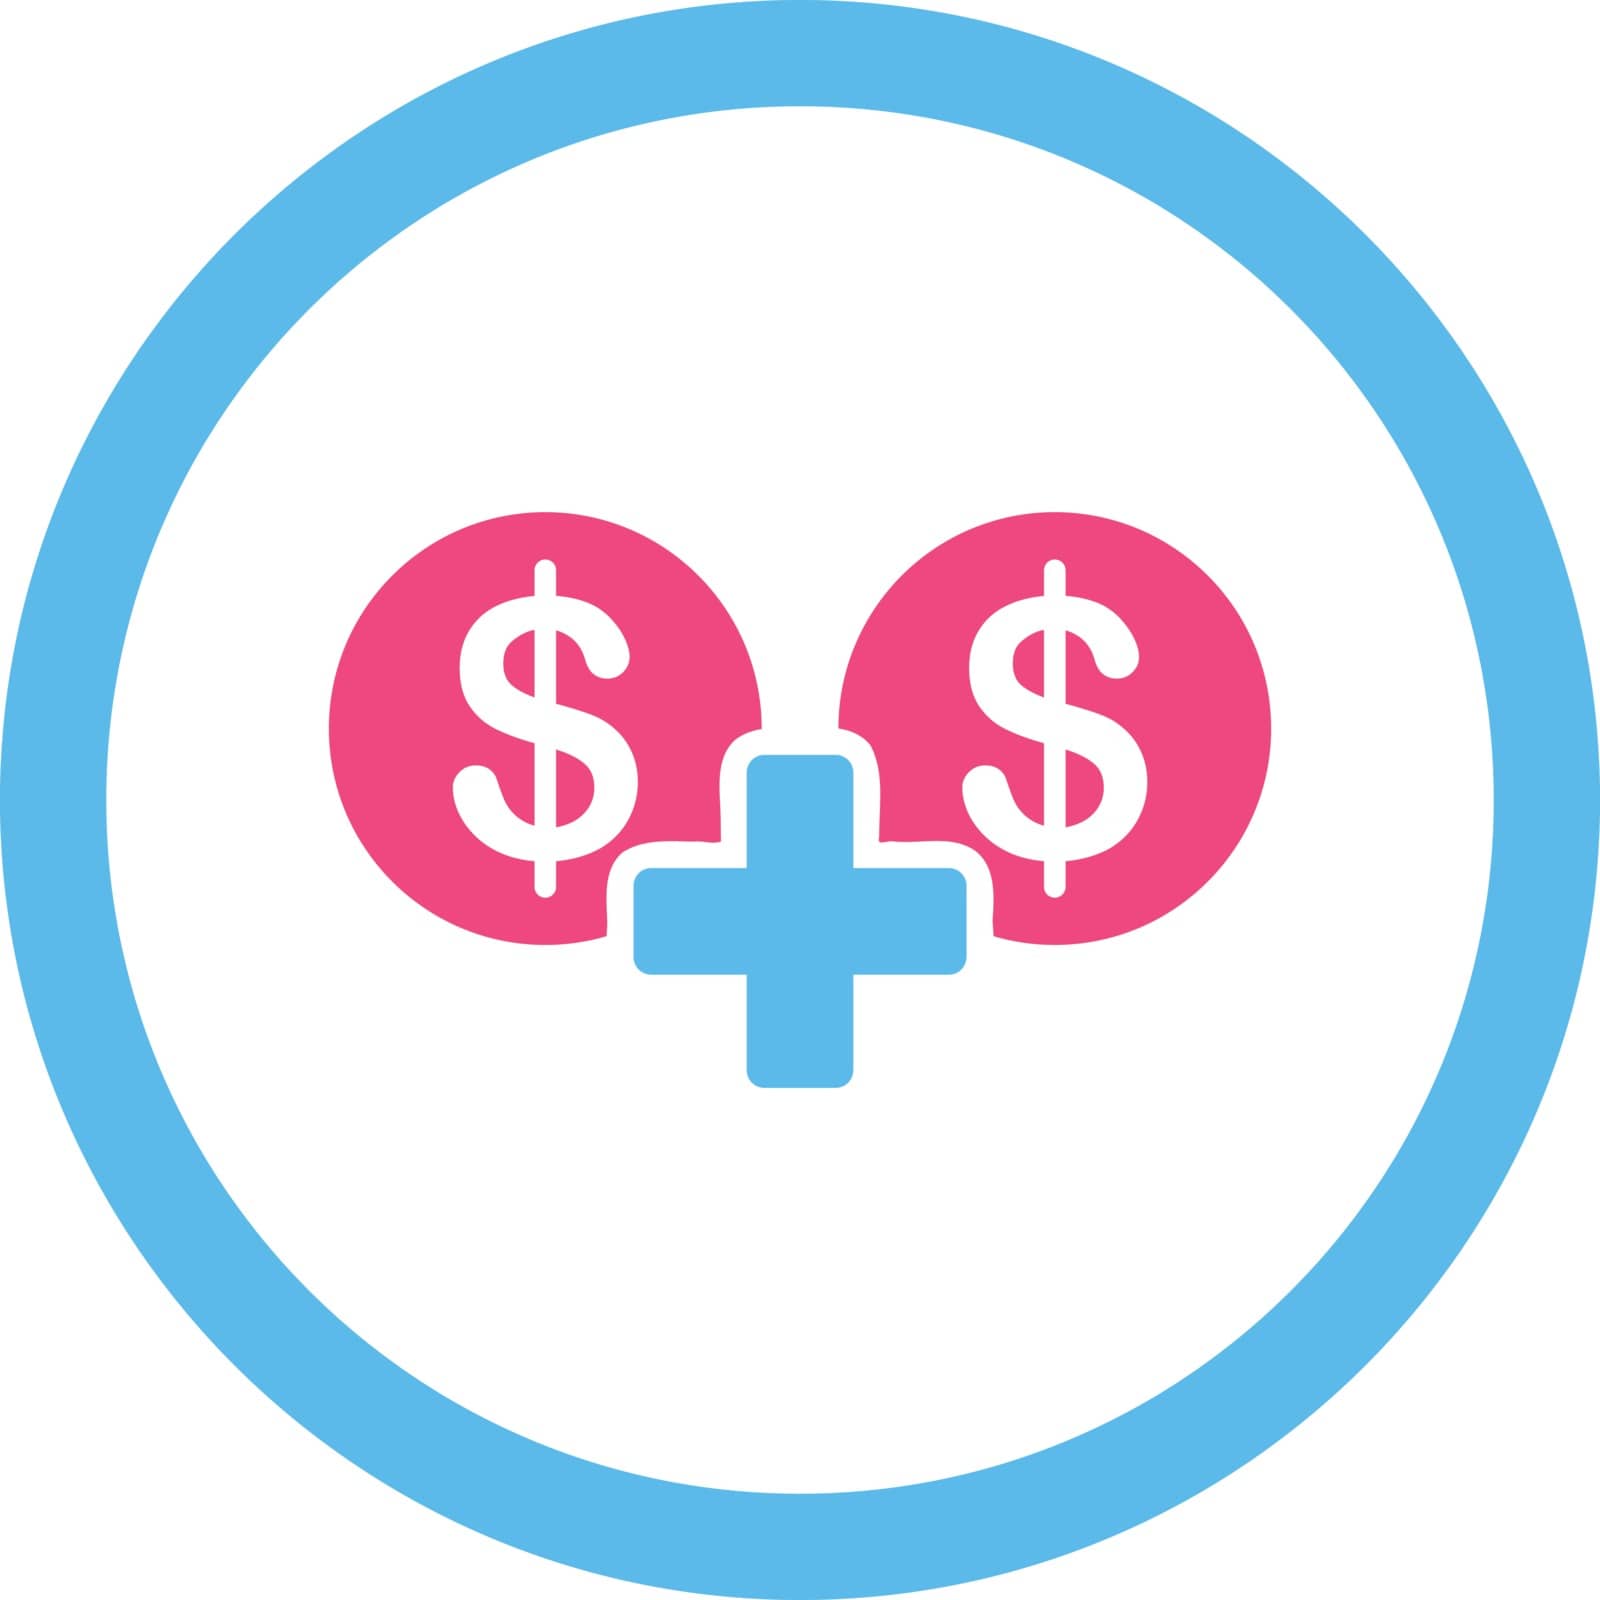 Sum vector icon. This flat rounded symbol uses pink and blue colors and isolated on a white background.